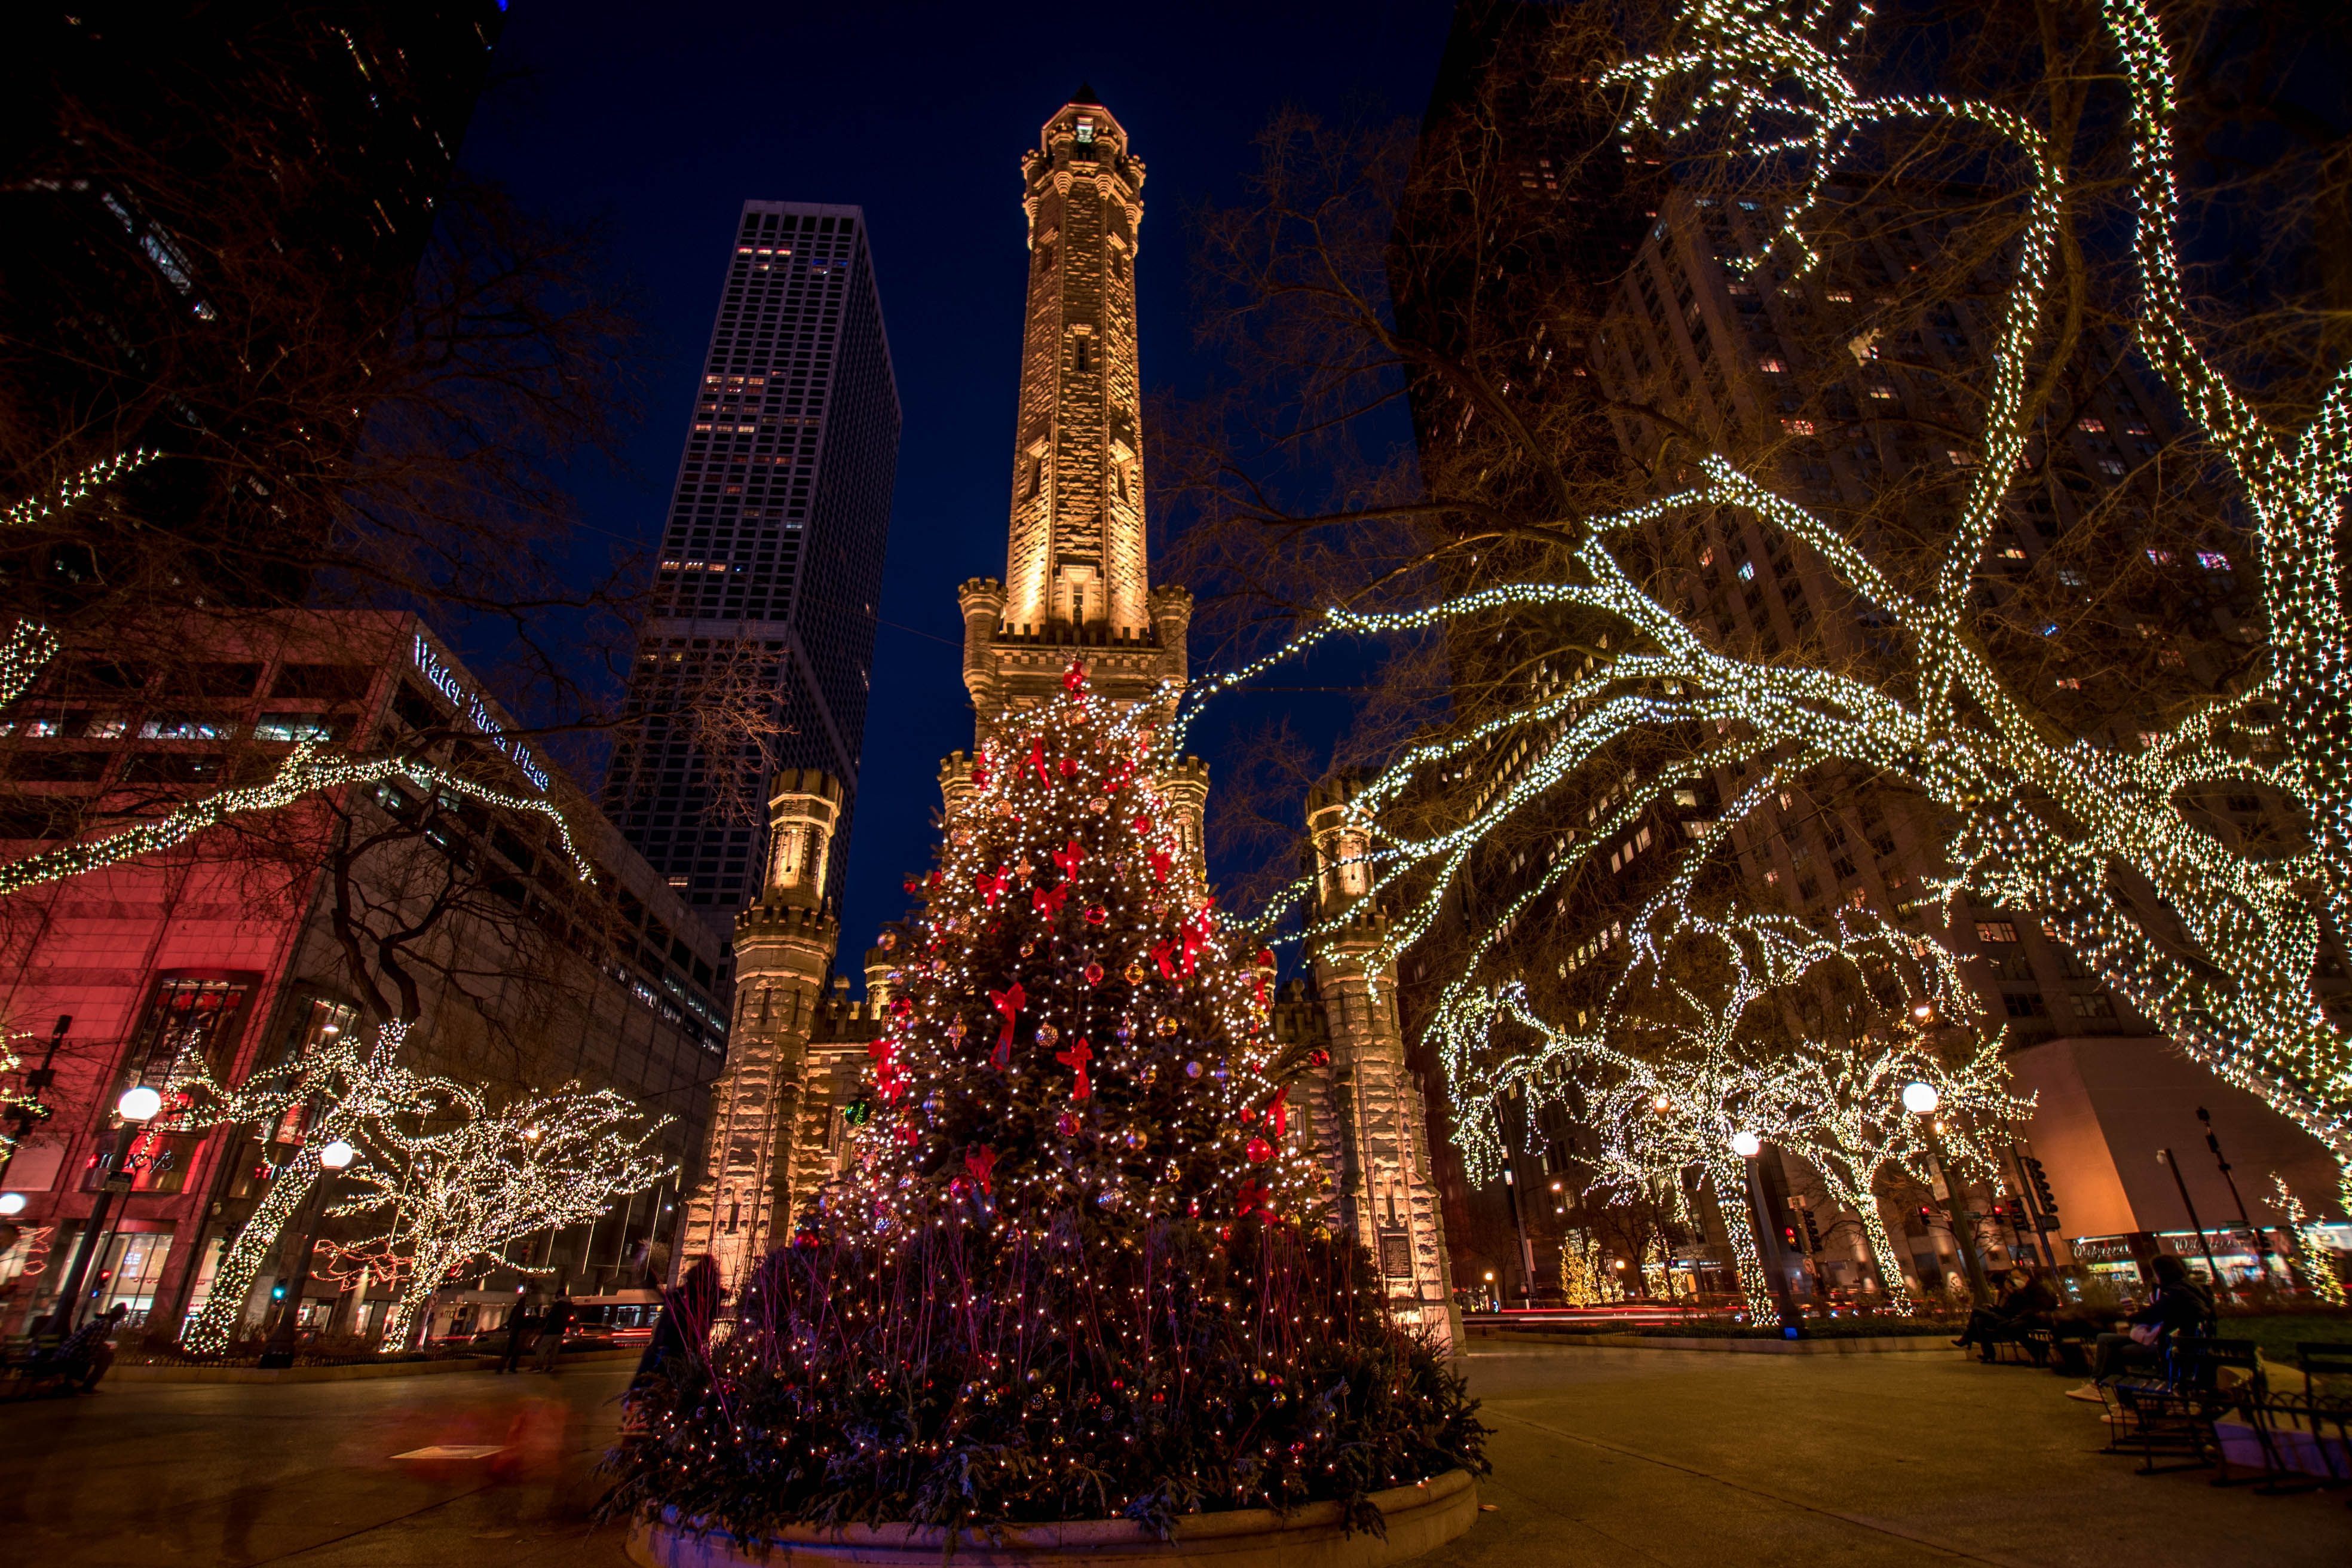 The Chicago Christmas tree lighting at historic Water Tower Place 